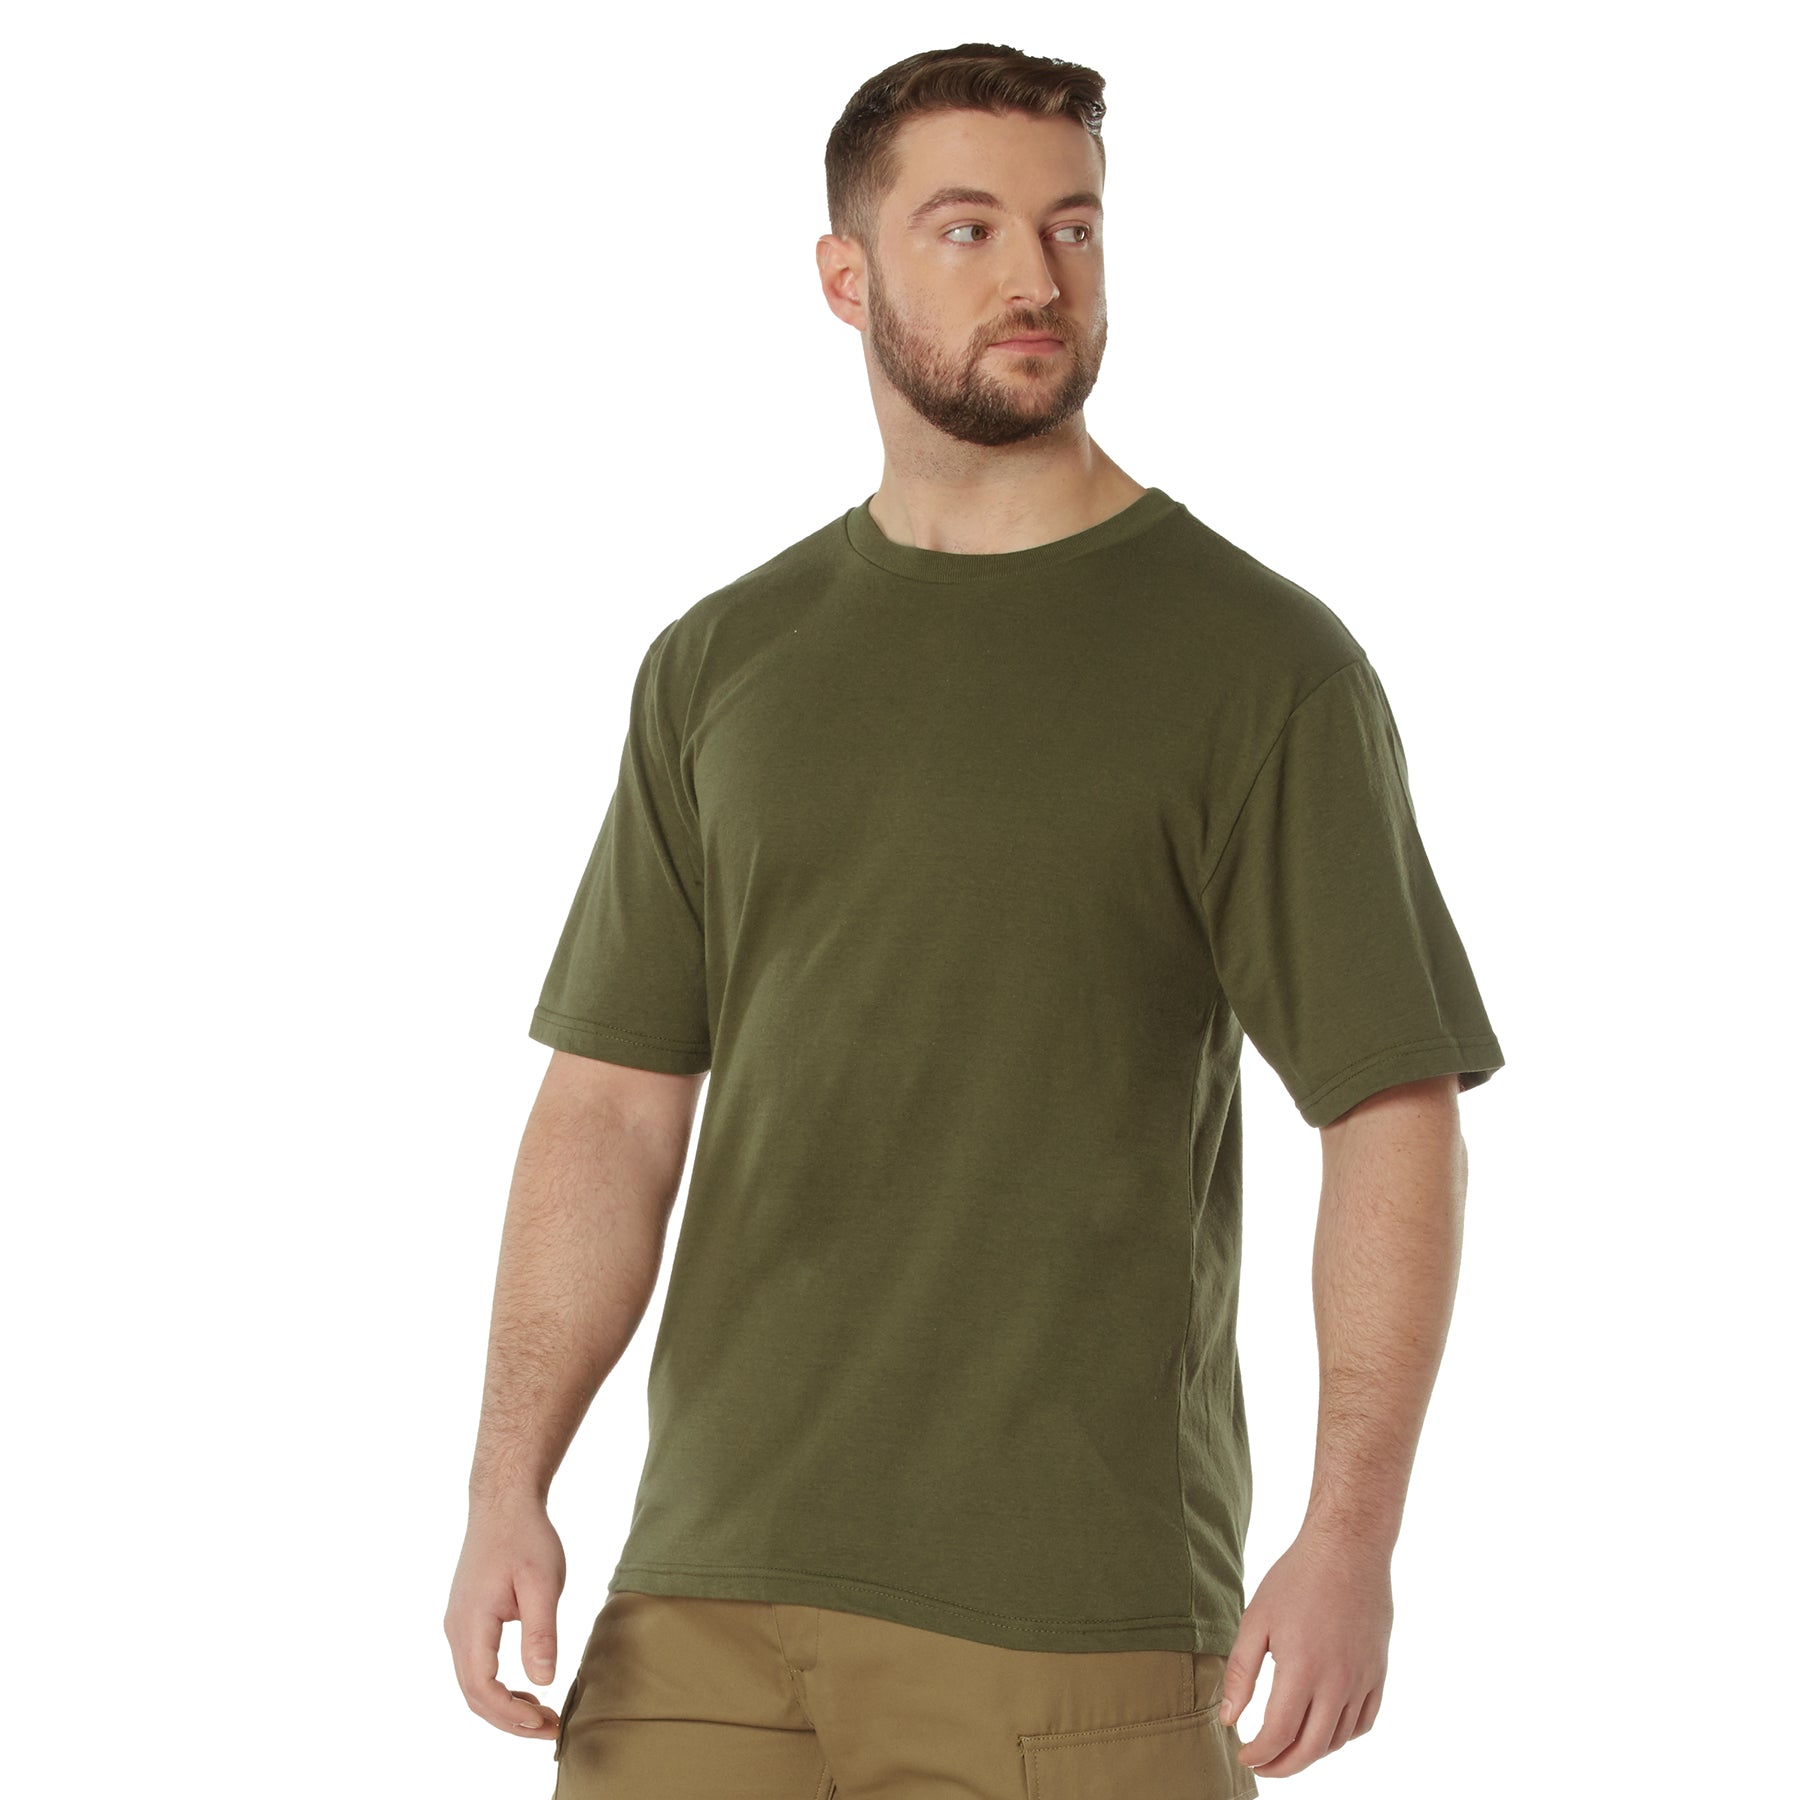 [AR 670-1] Poly/Cotton Comfort Fit T-Shirts Olive Drab